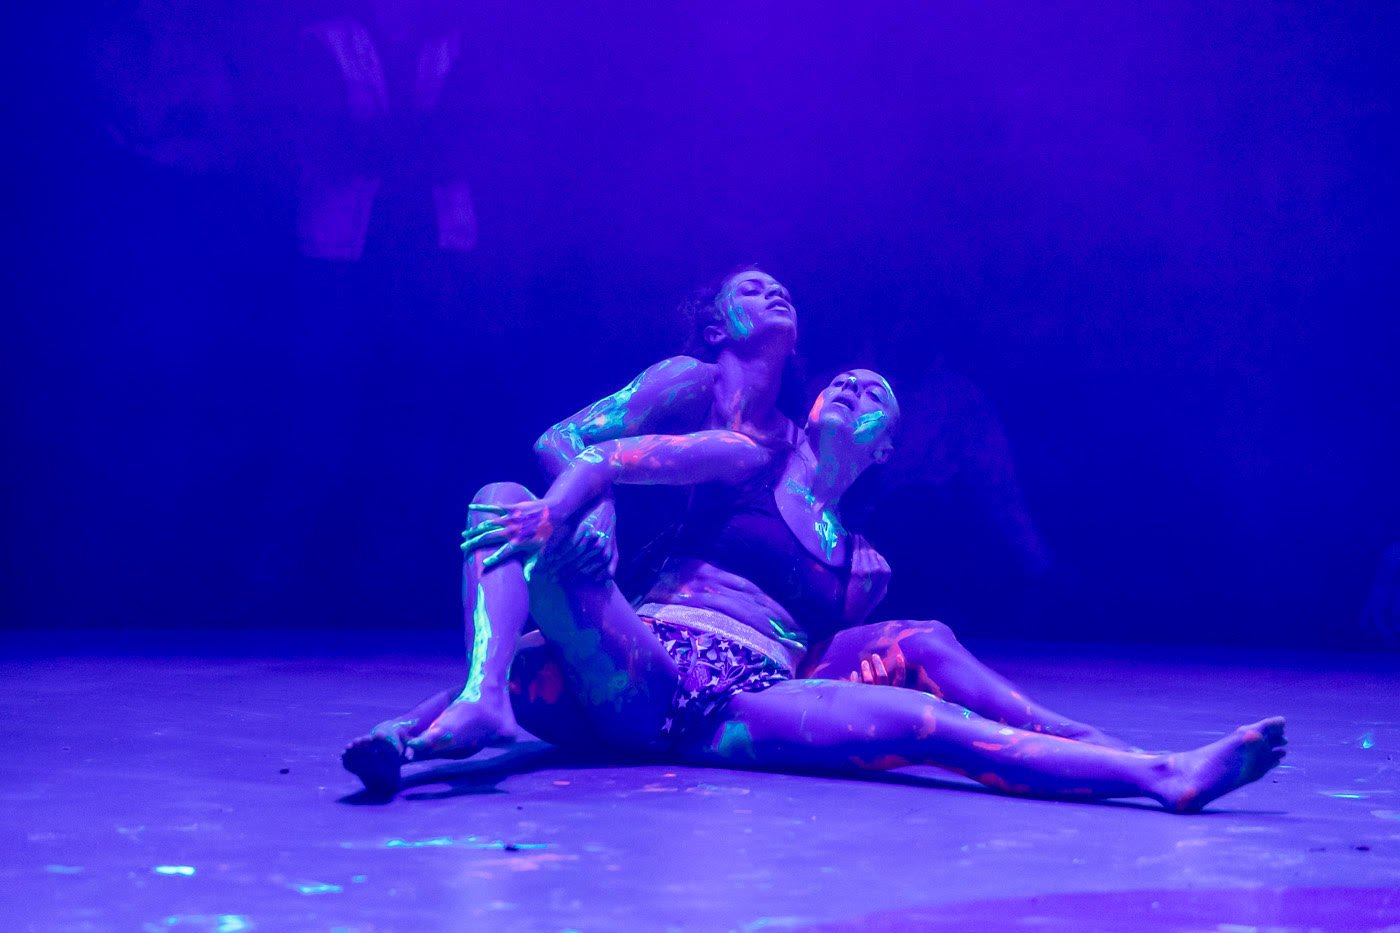 Two performers lay on the floor, holding each other. They are wearing underwear and their bodies are painted with neon paint in various colours. The lighting is low and dark.